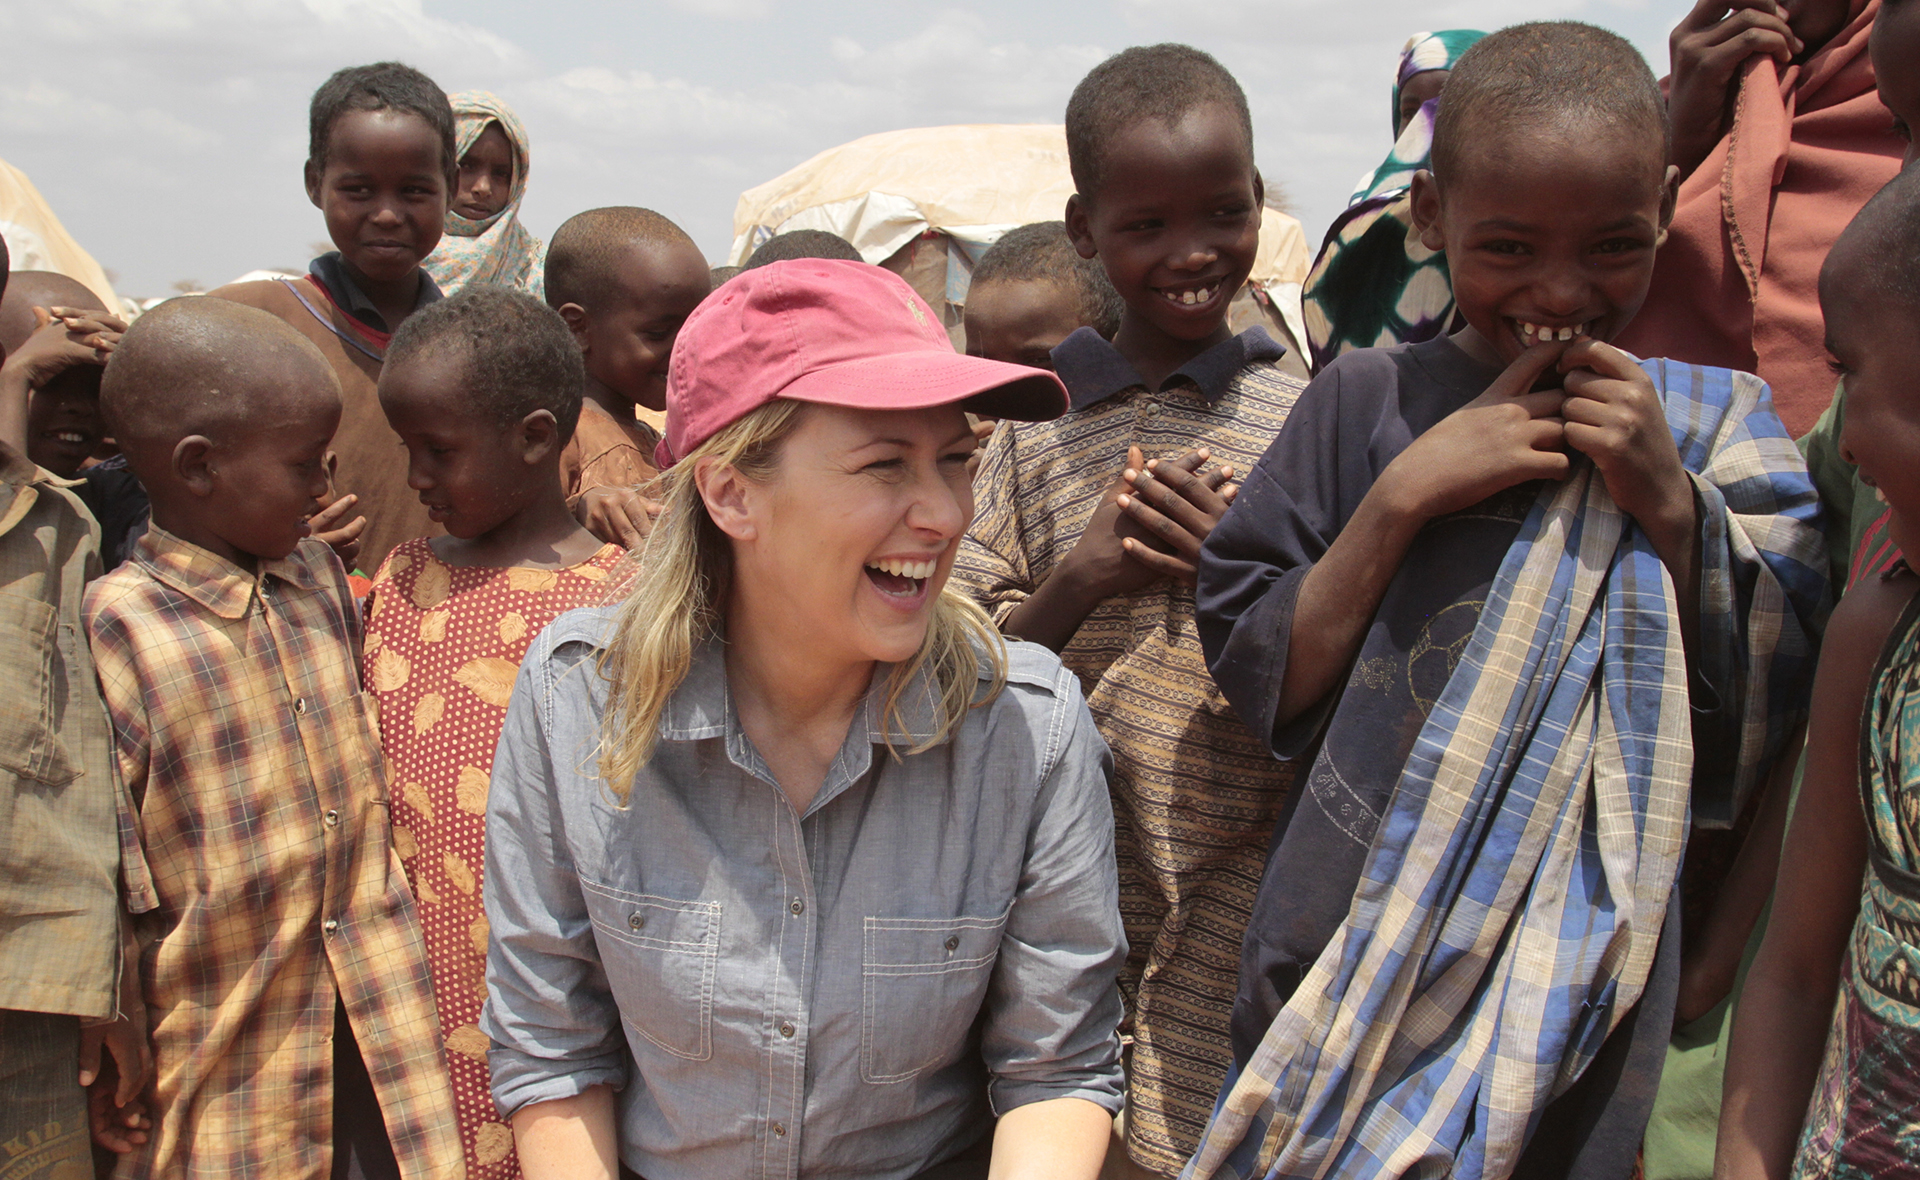 Melissa Doyle reflects on her life-changing trip to Kenya ten years on: “The world has clearly and irreversibly changed”